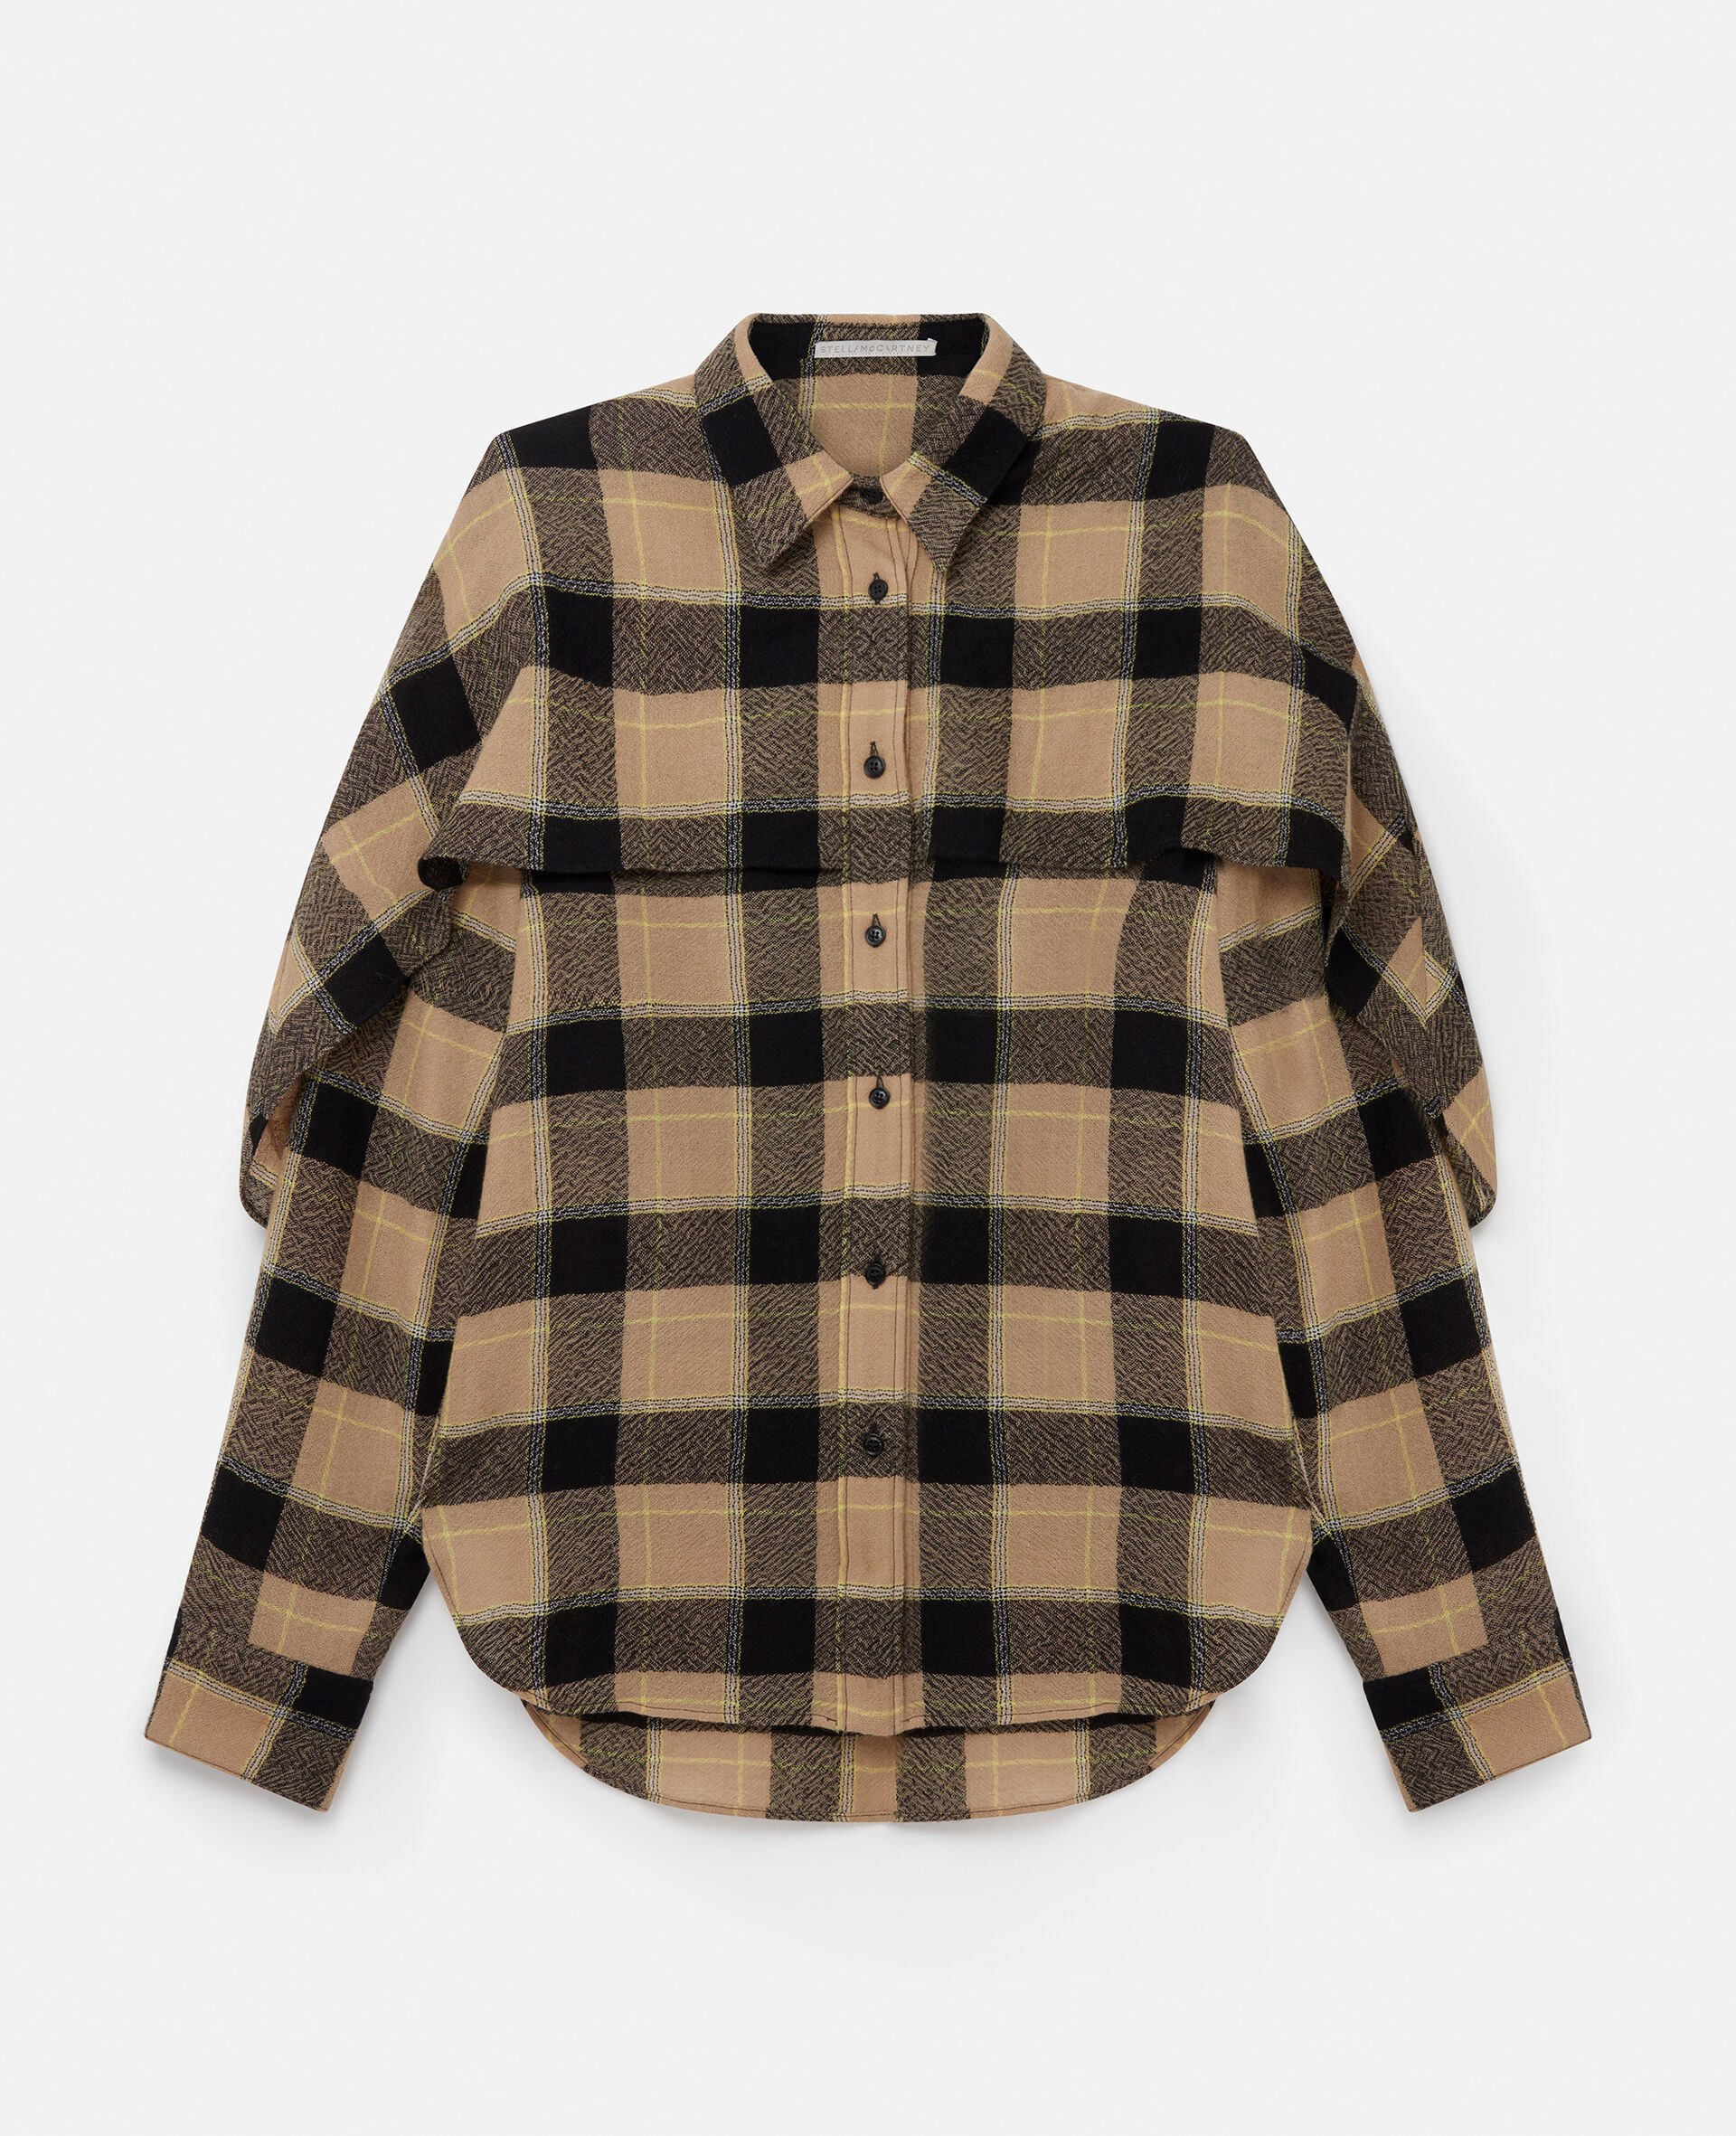 Layered Check Shirt-Beige-large image number 0